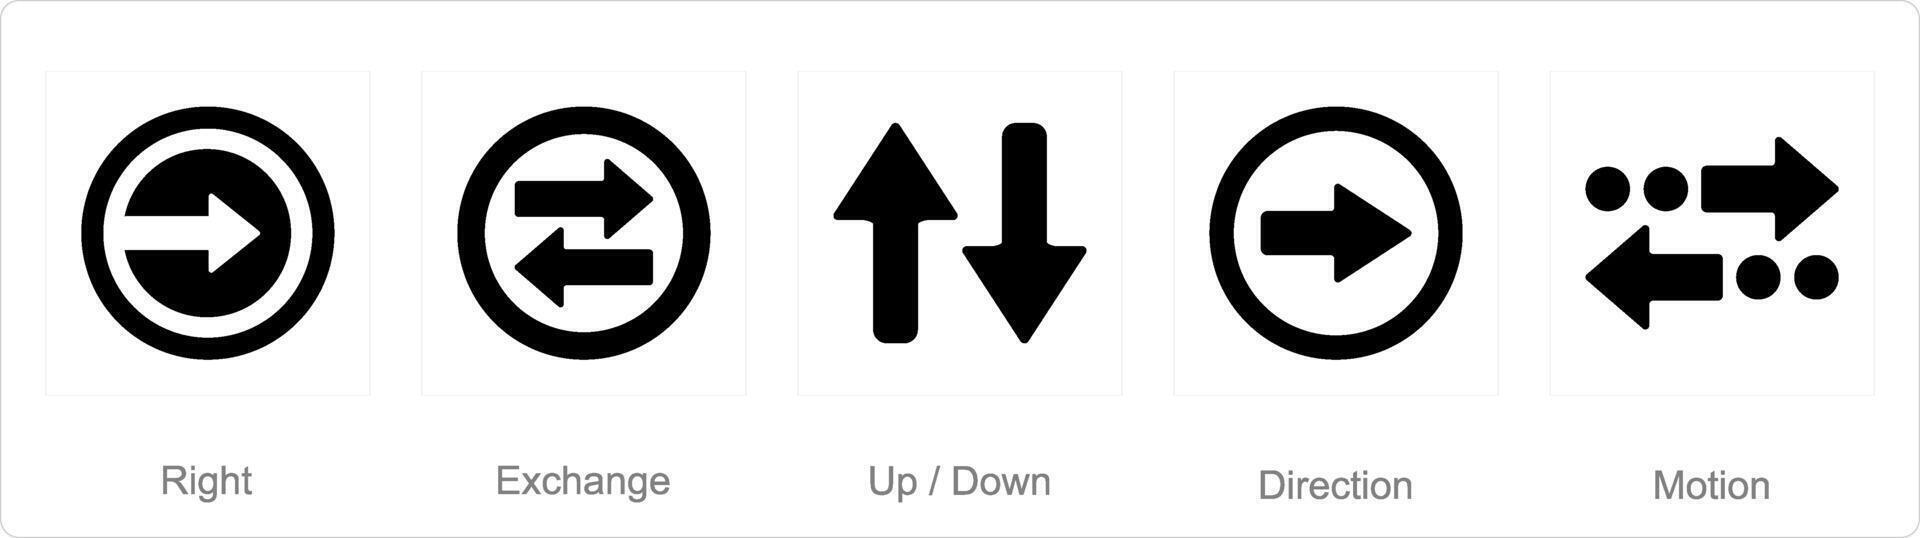 A set of 5 arrows icons as right, exchange, up down vector